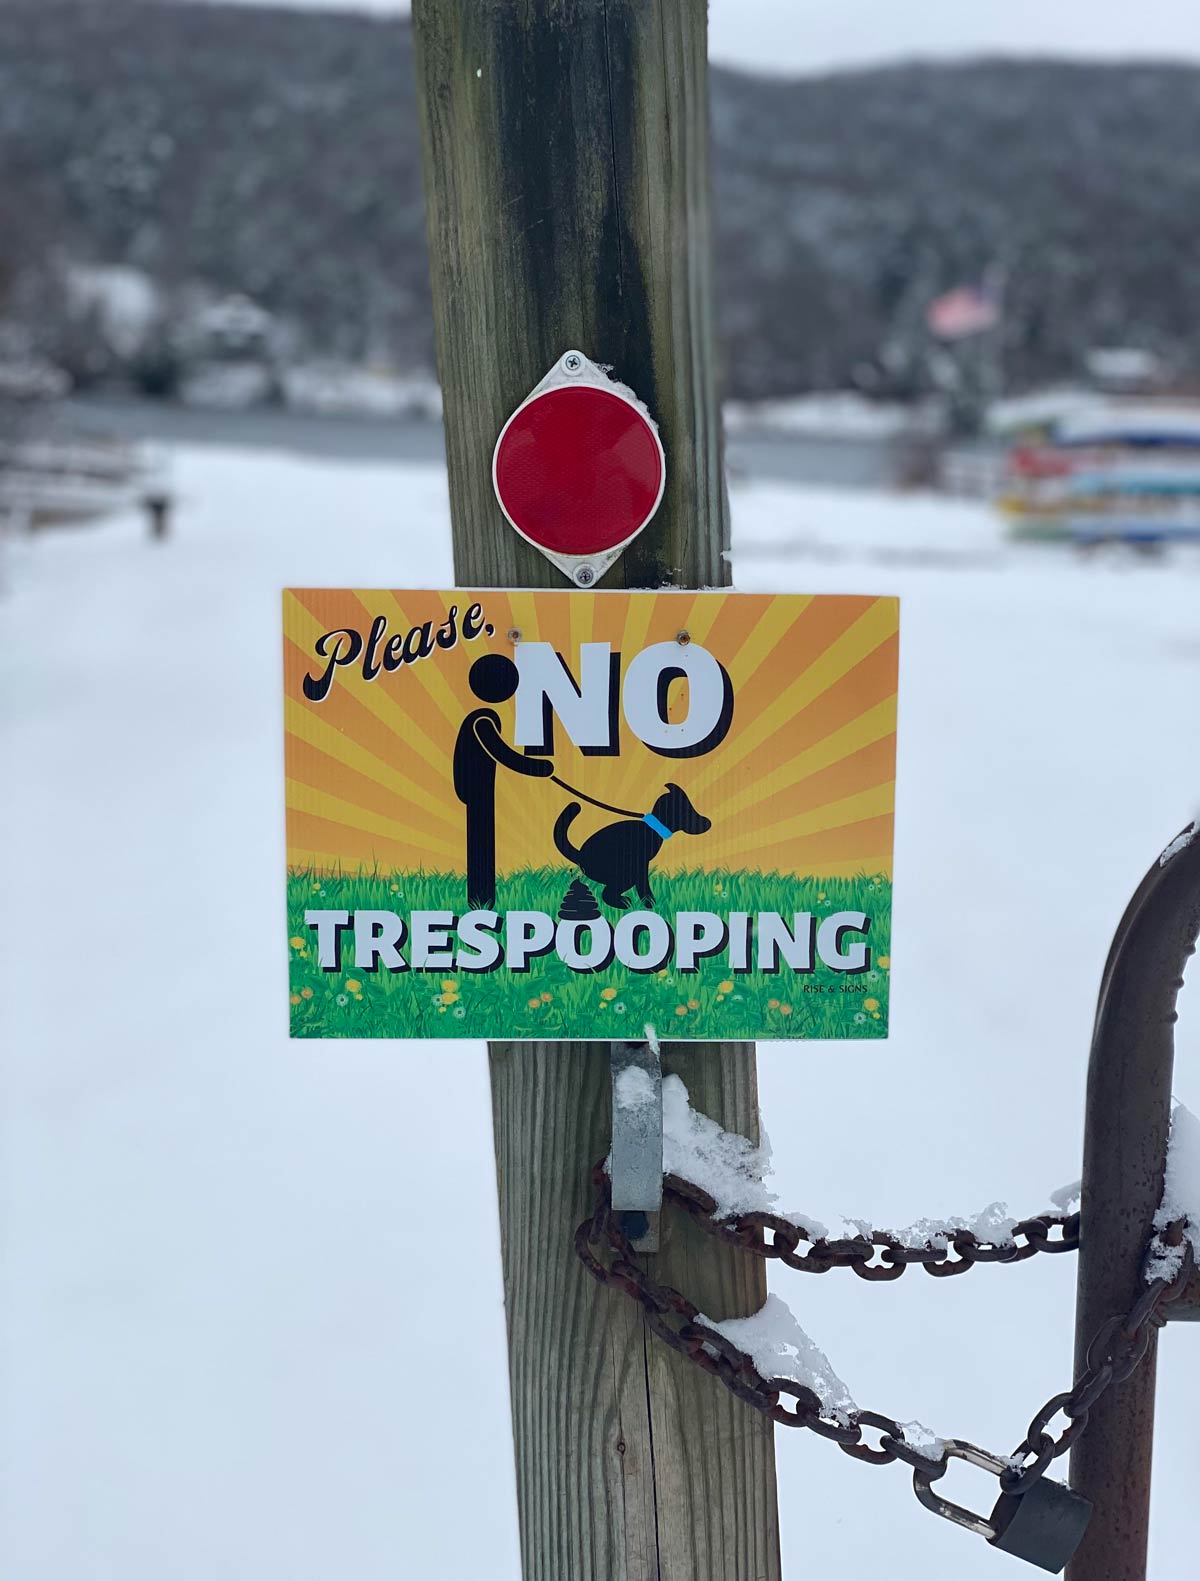 Learned a new word today. Trespooping